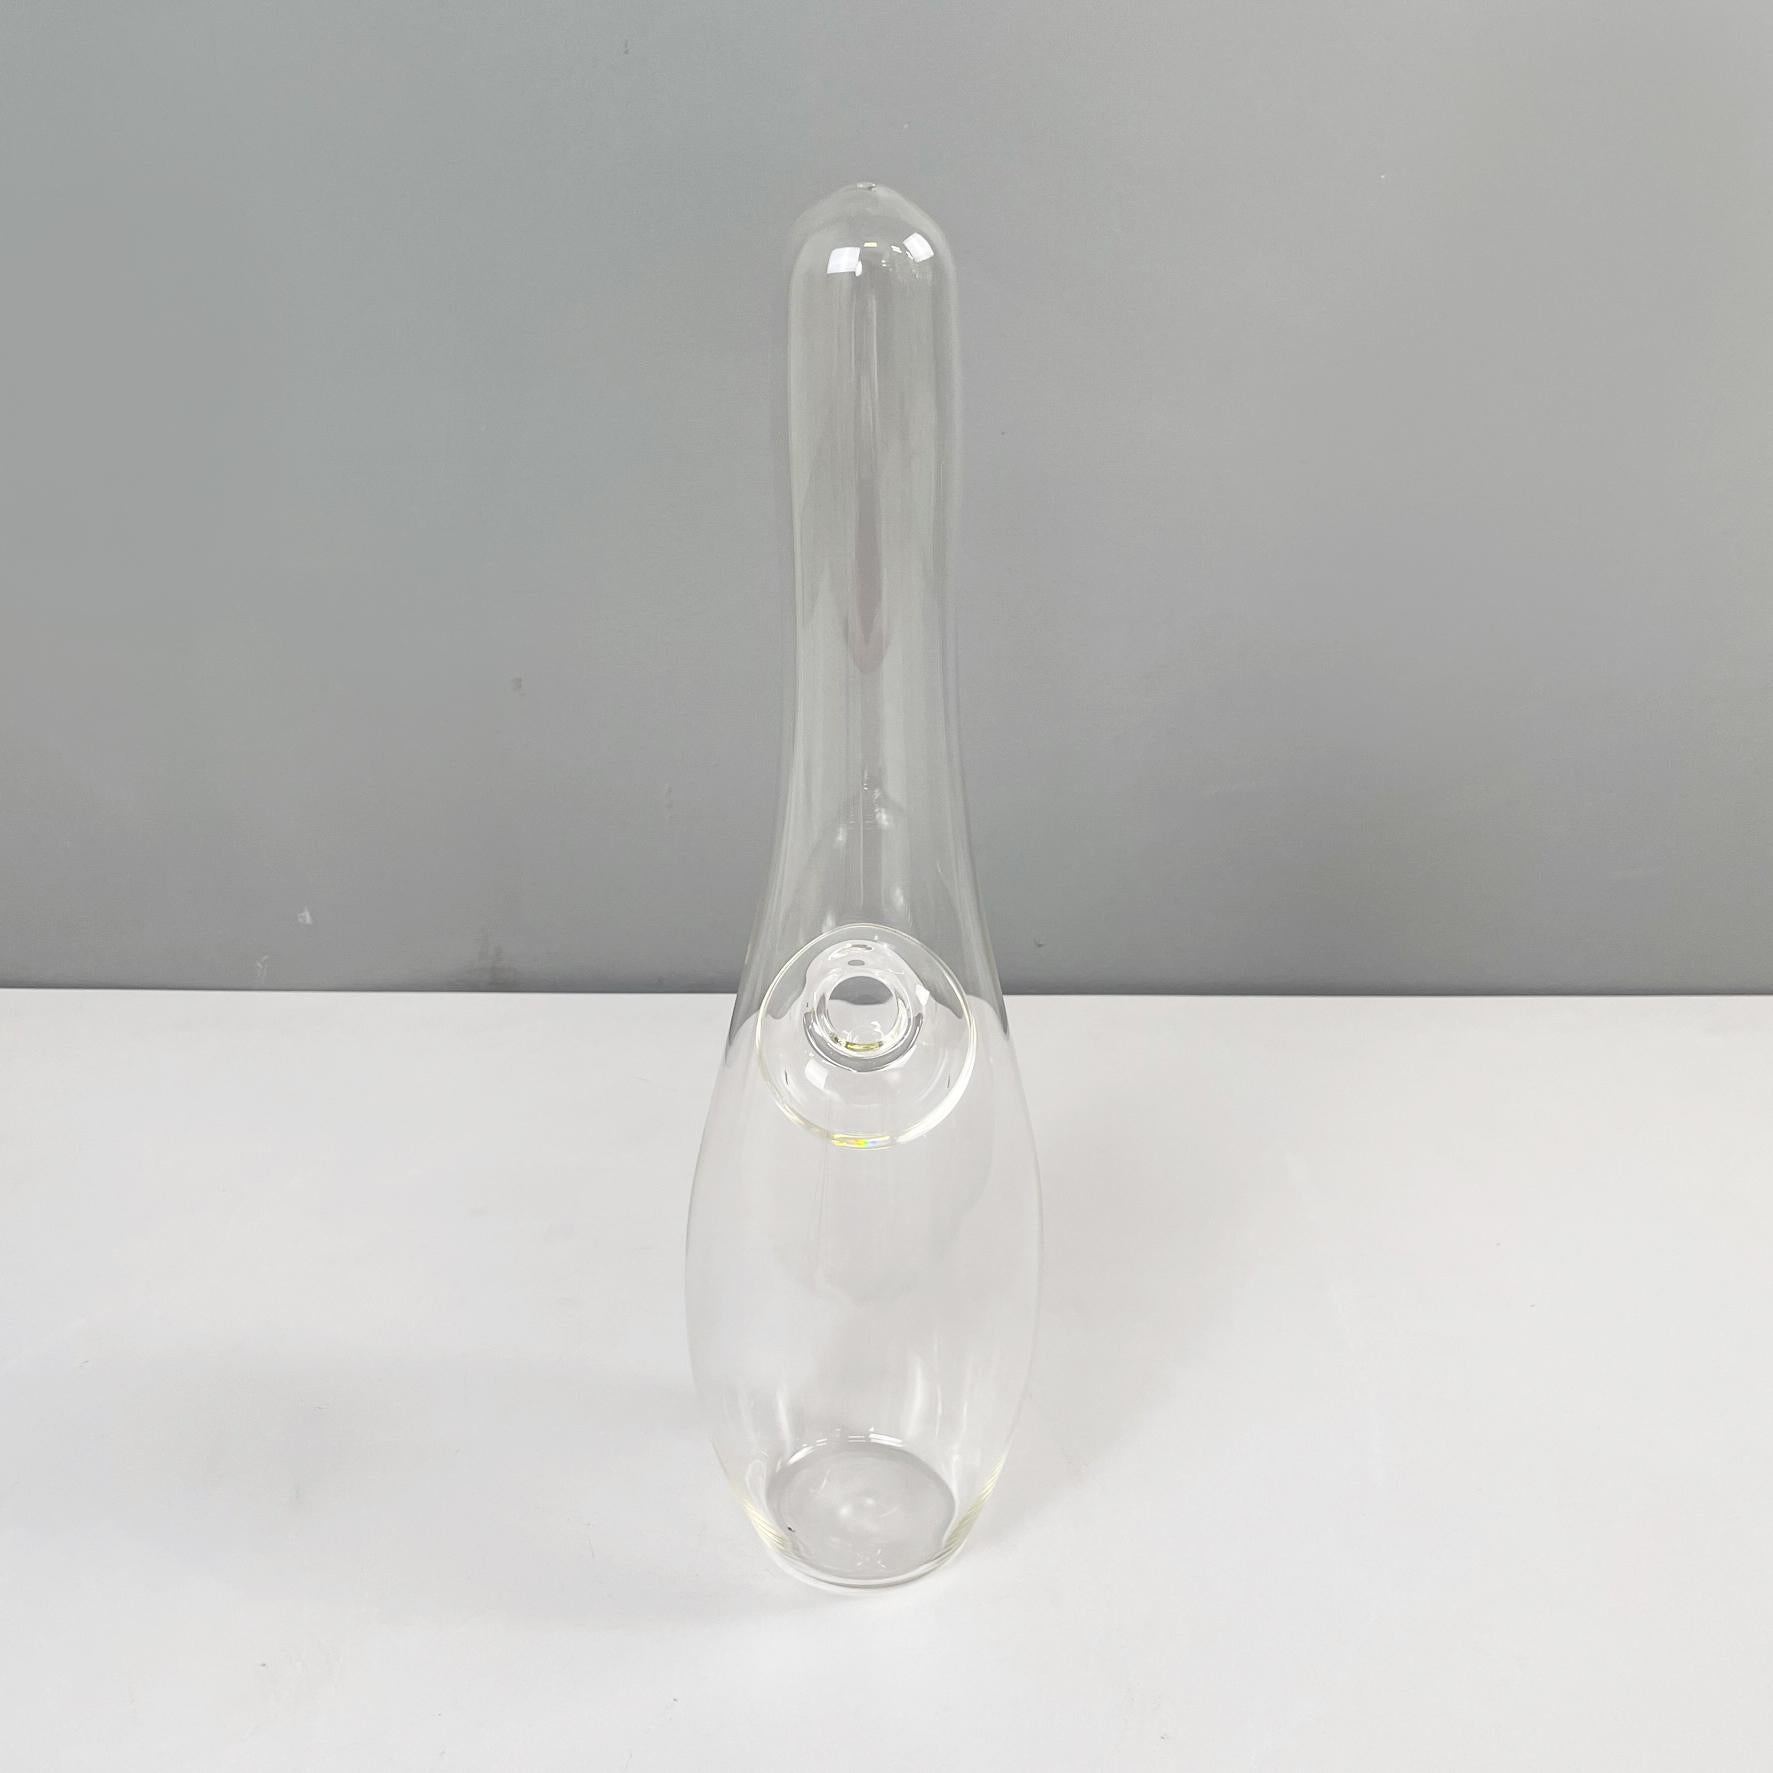 Italian modern Glass vase with irregular and round shape by Roberto Faccioli, 1990s
Round base vase in finely handcrafted glass. The structure has an irregular and rounded shape. Inside it has a sphere with a side hole.
Designed and produced by